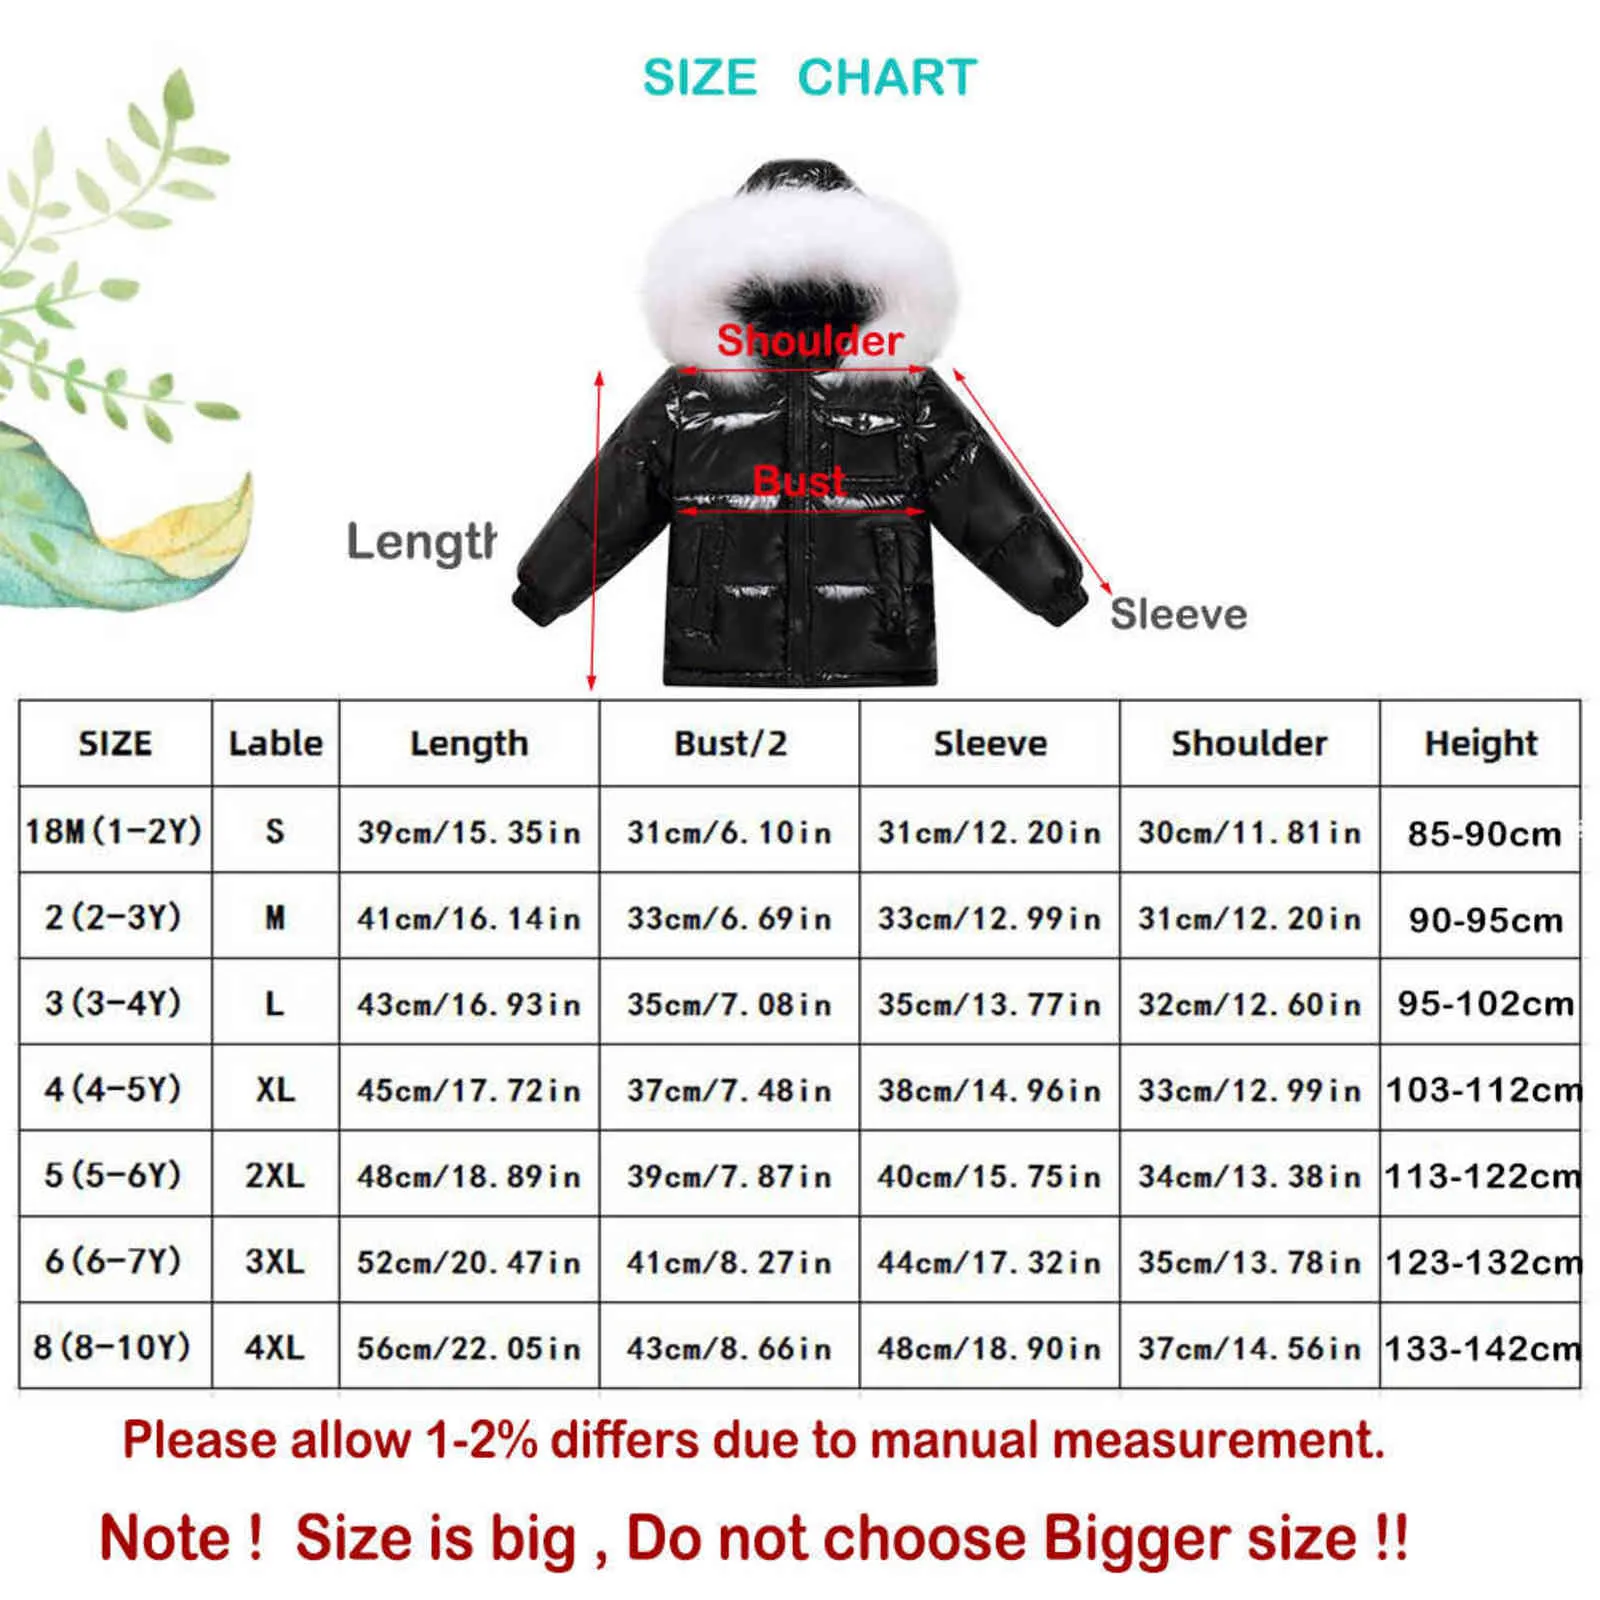 Unisex winter coat down jacket for boys clothes 2-14 y children's clothing thicken outerwear & coats with nature fur parka kids 211027